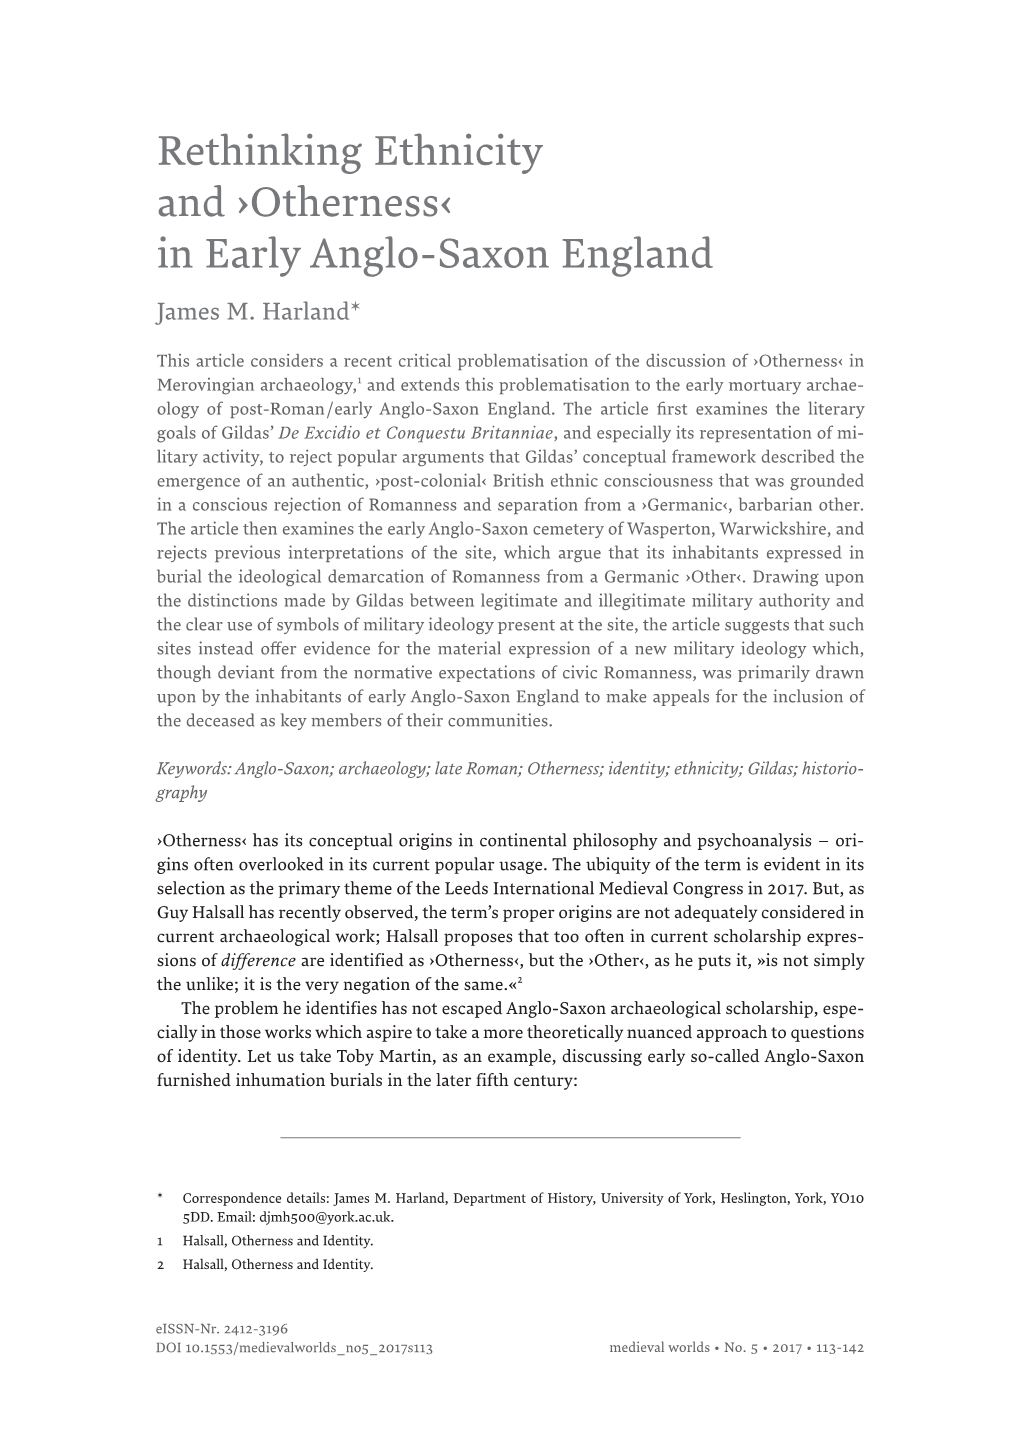 Rethinking Ethnicity and ›Otherness‹ in Early Anglo-Saxon England James M